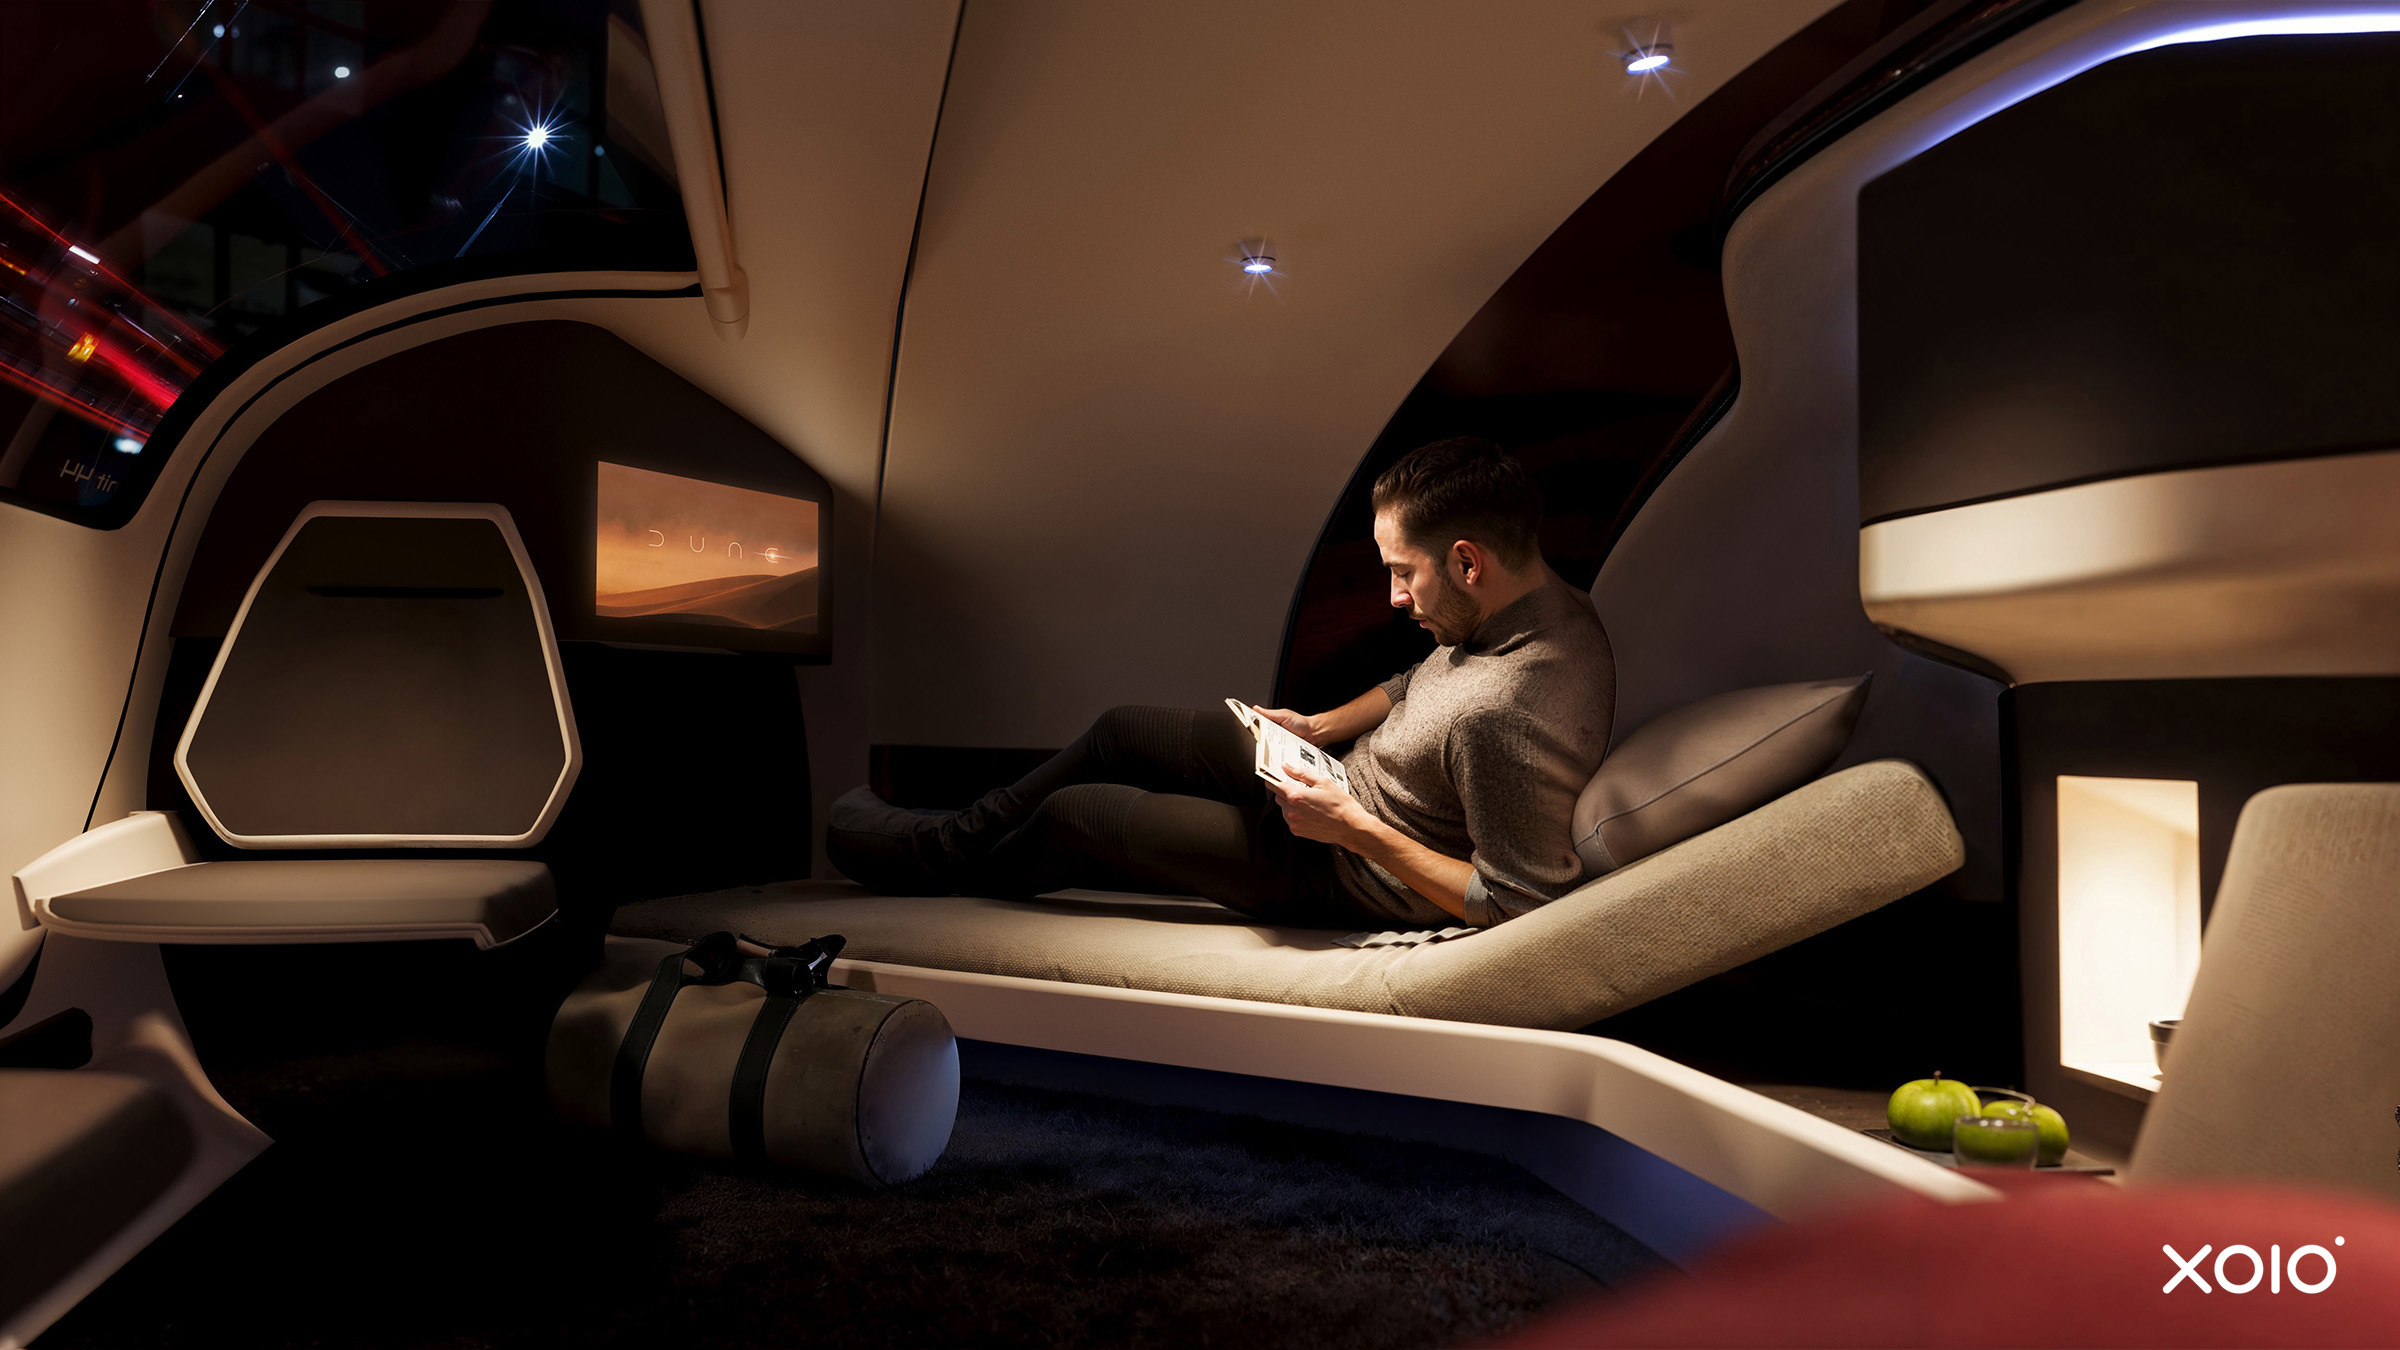 It can accommodate up to two passengers at a time  who can either sit upright or lie down on each of the two single beds